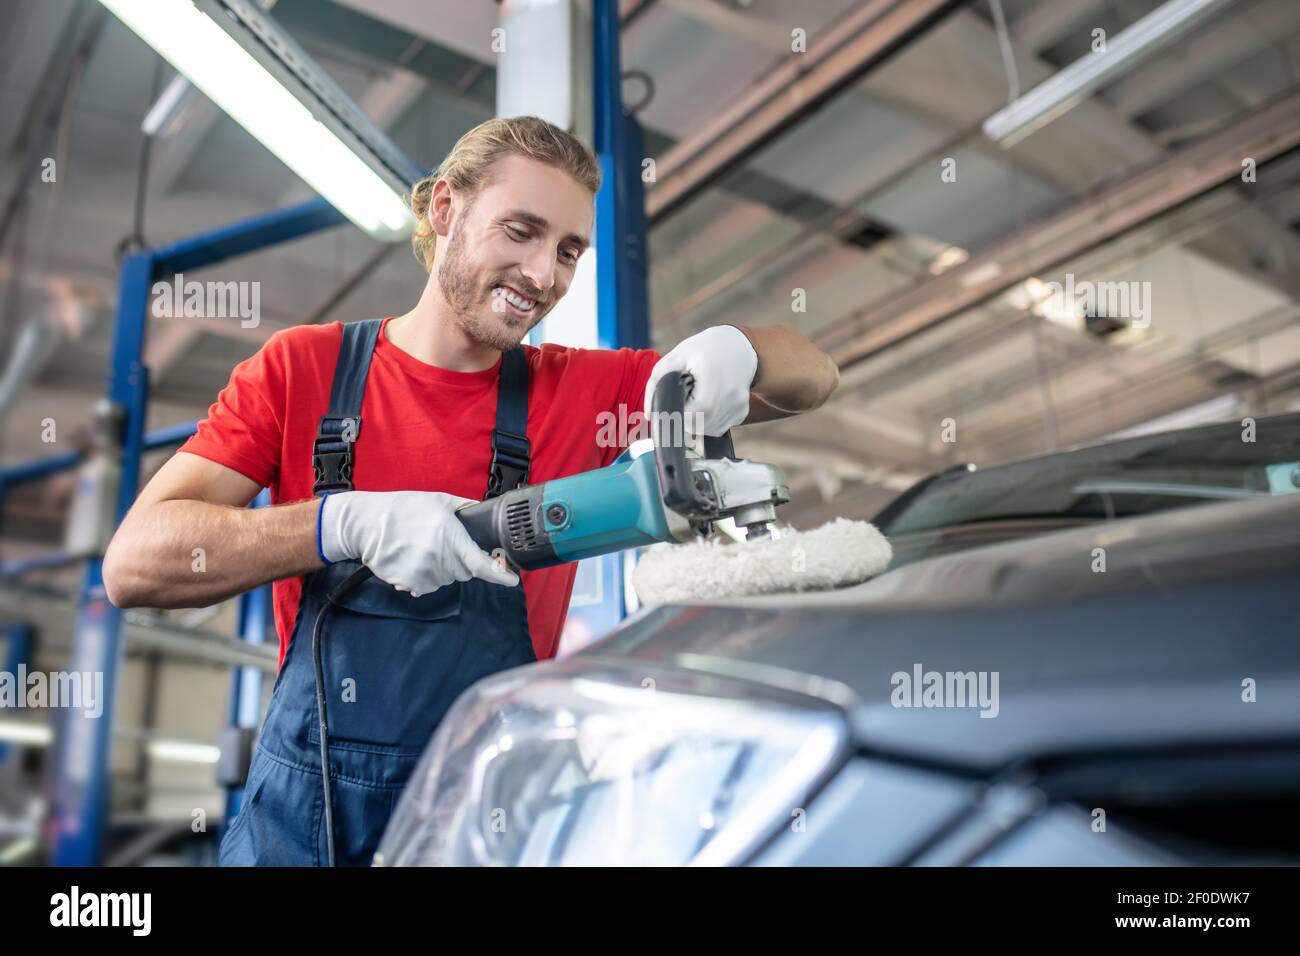 Man who improves appearance of car body Stock Photo